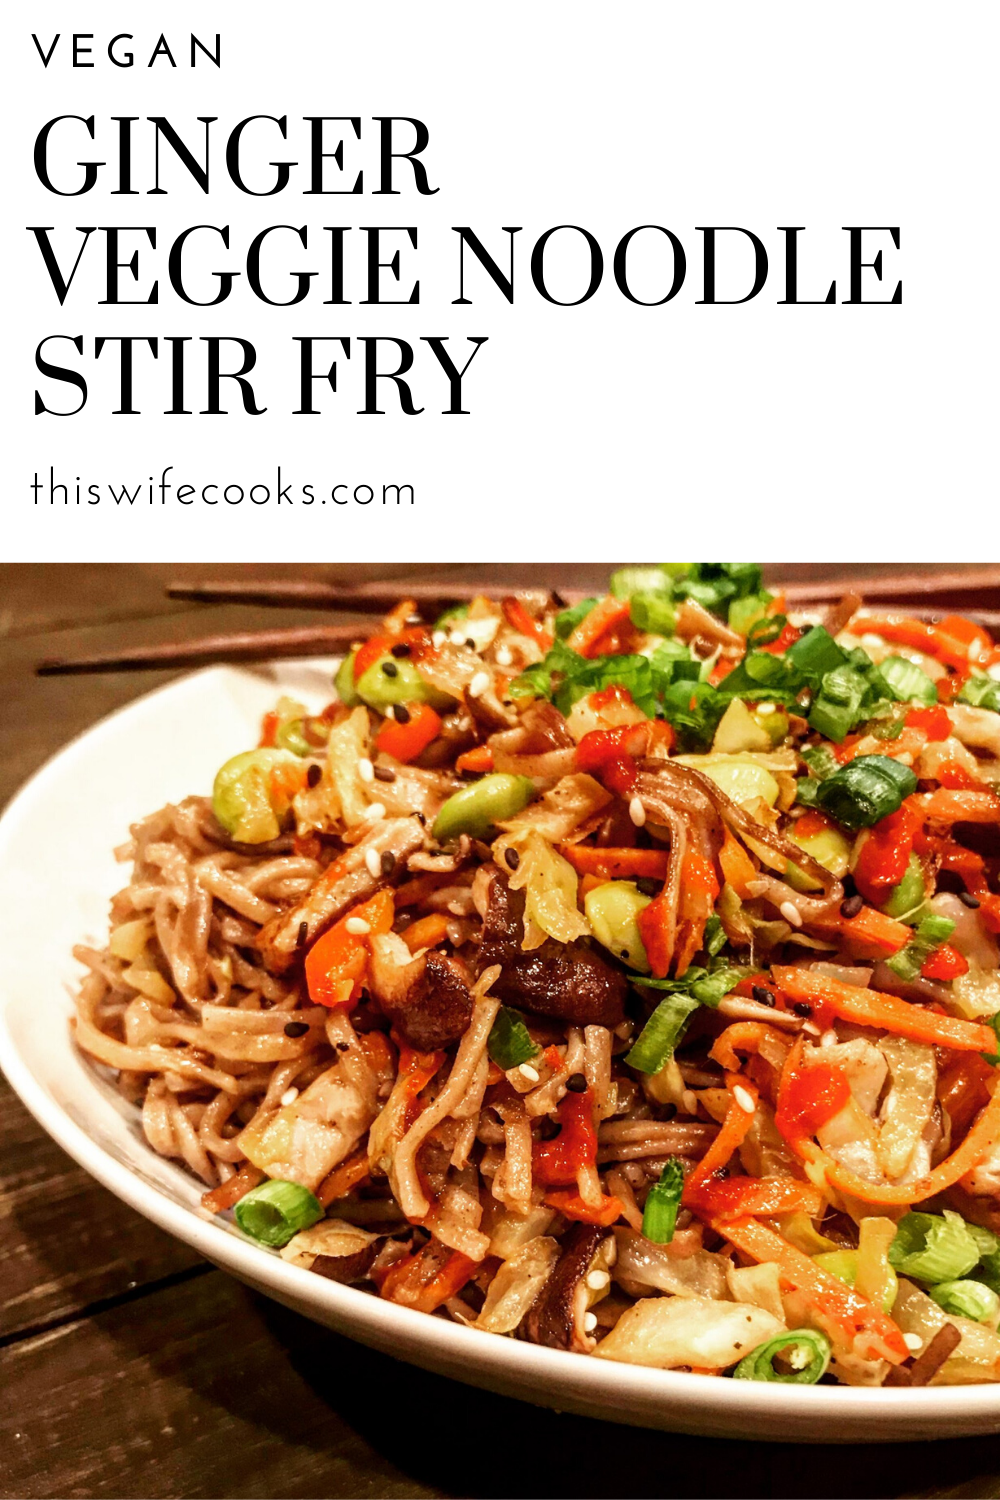 Ginger Vegetable Noodle Stir Fry - Colorful, flavorful, and loaded with good-for-you veggies! Easily customizable to whatever vegetables you have on hand. via @thiswifecooks